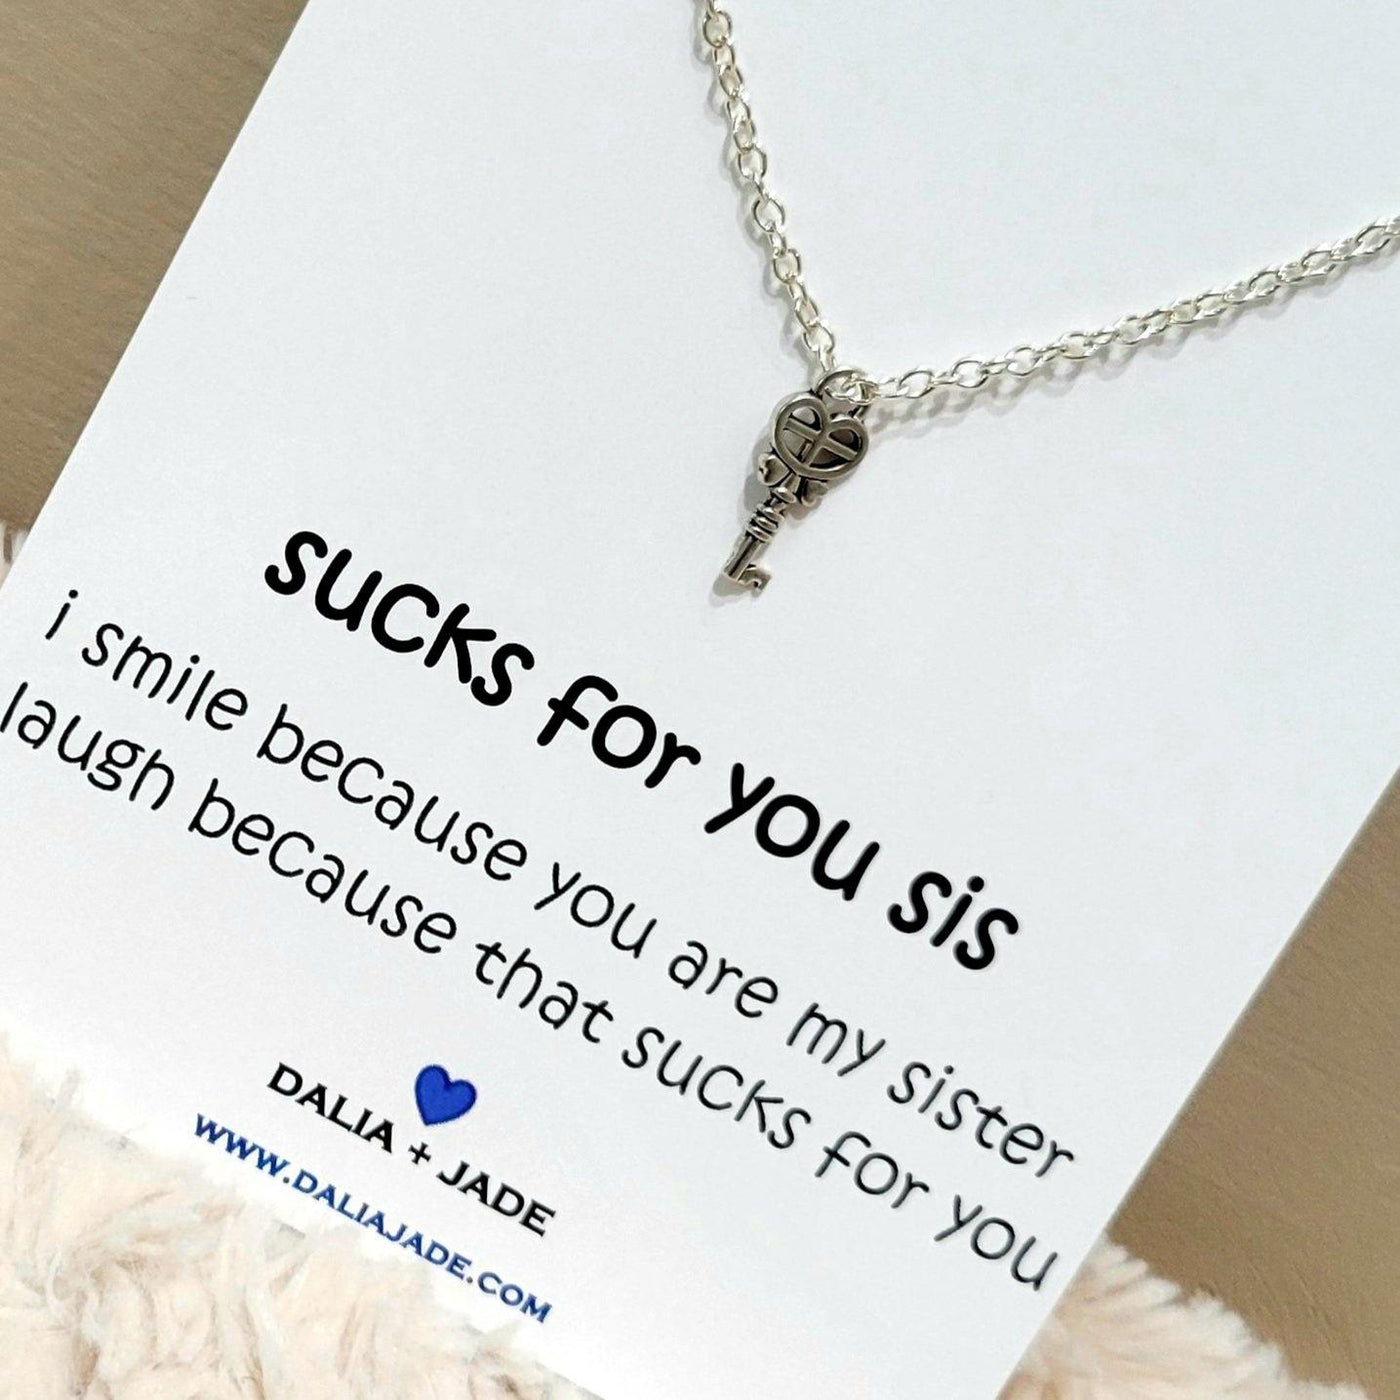 Sucks for You Sis - Key Necklace - Funny Gift Idea for Your Sister - Accessories - dalia + jade 